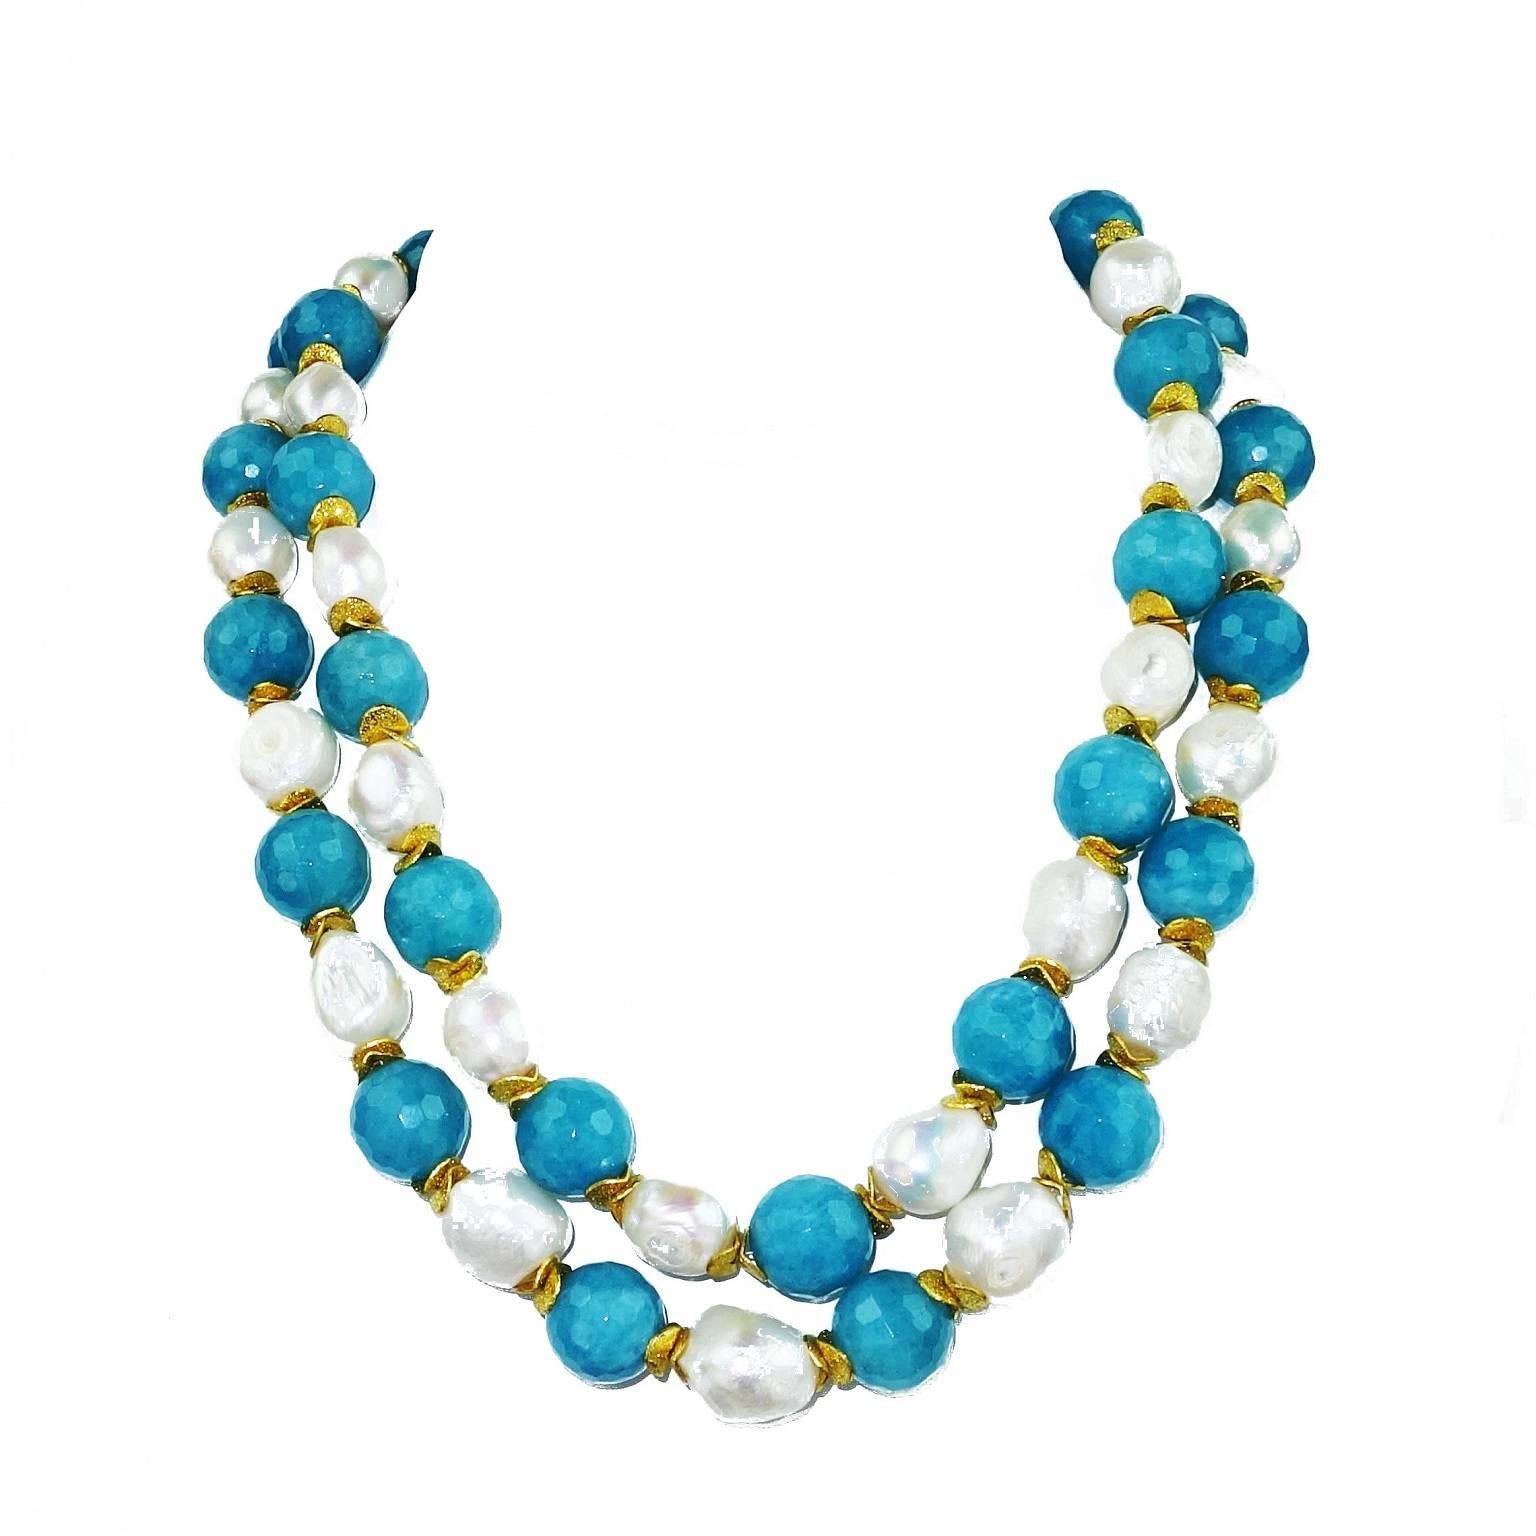 Double Strand Turquoise Agate and Pearls Necklace